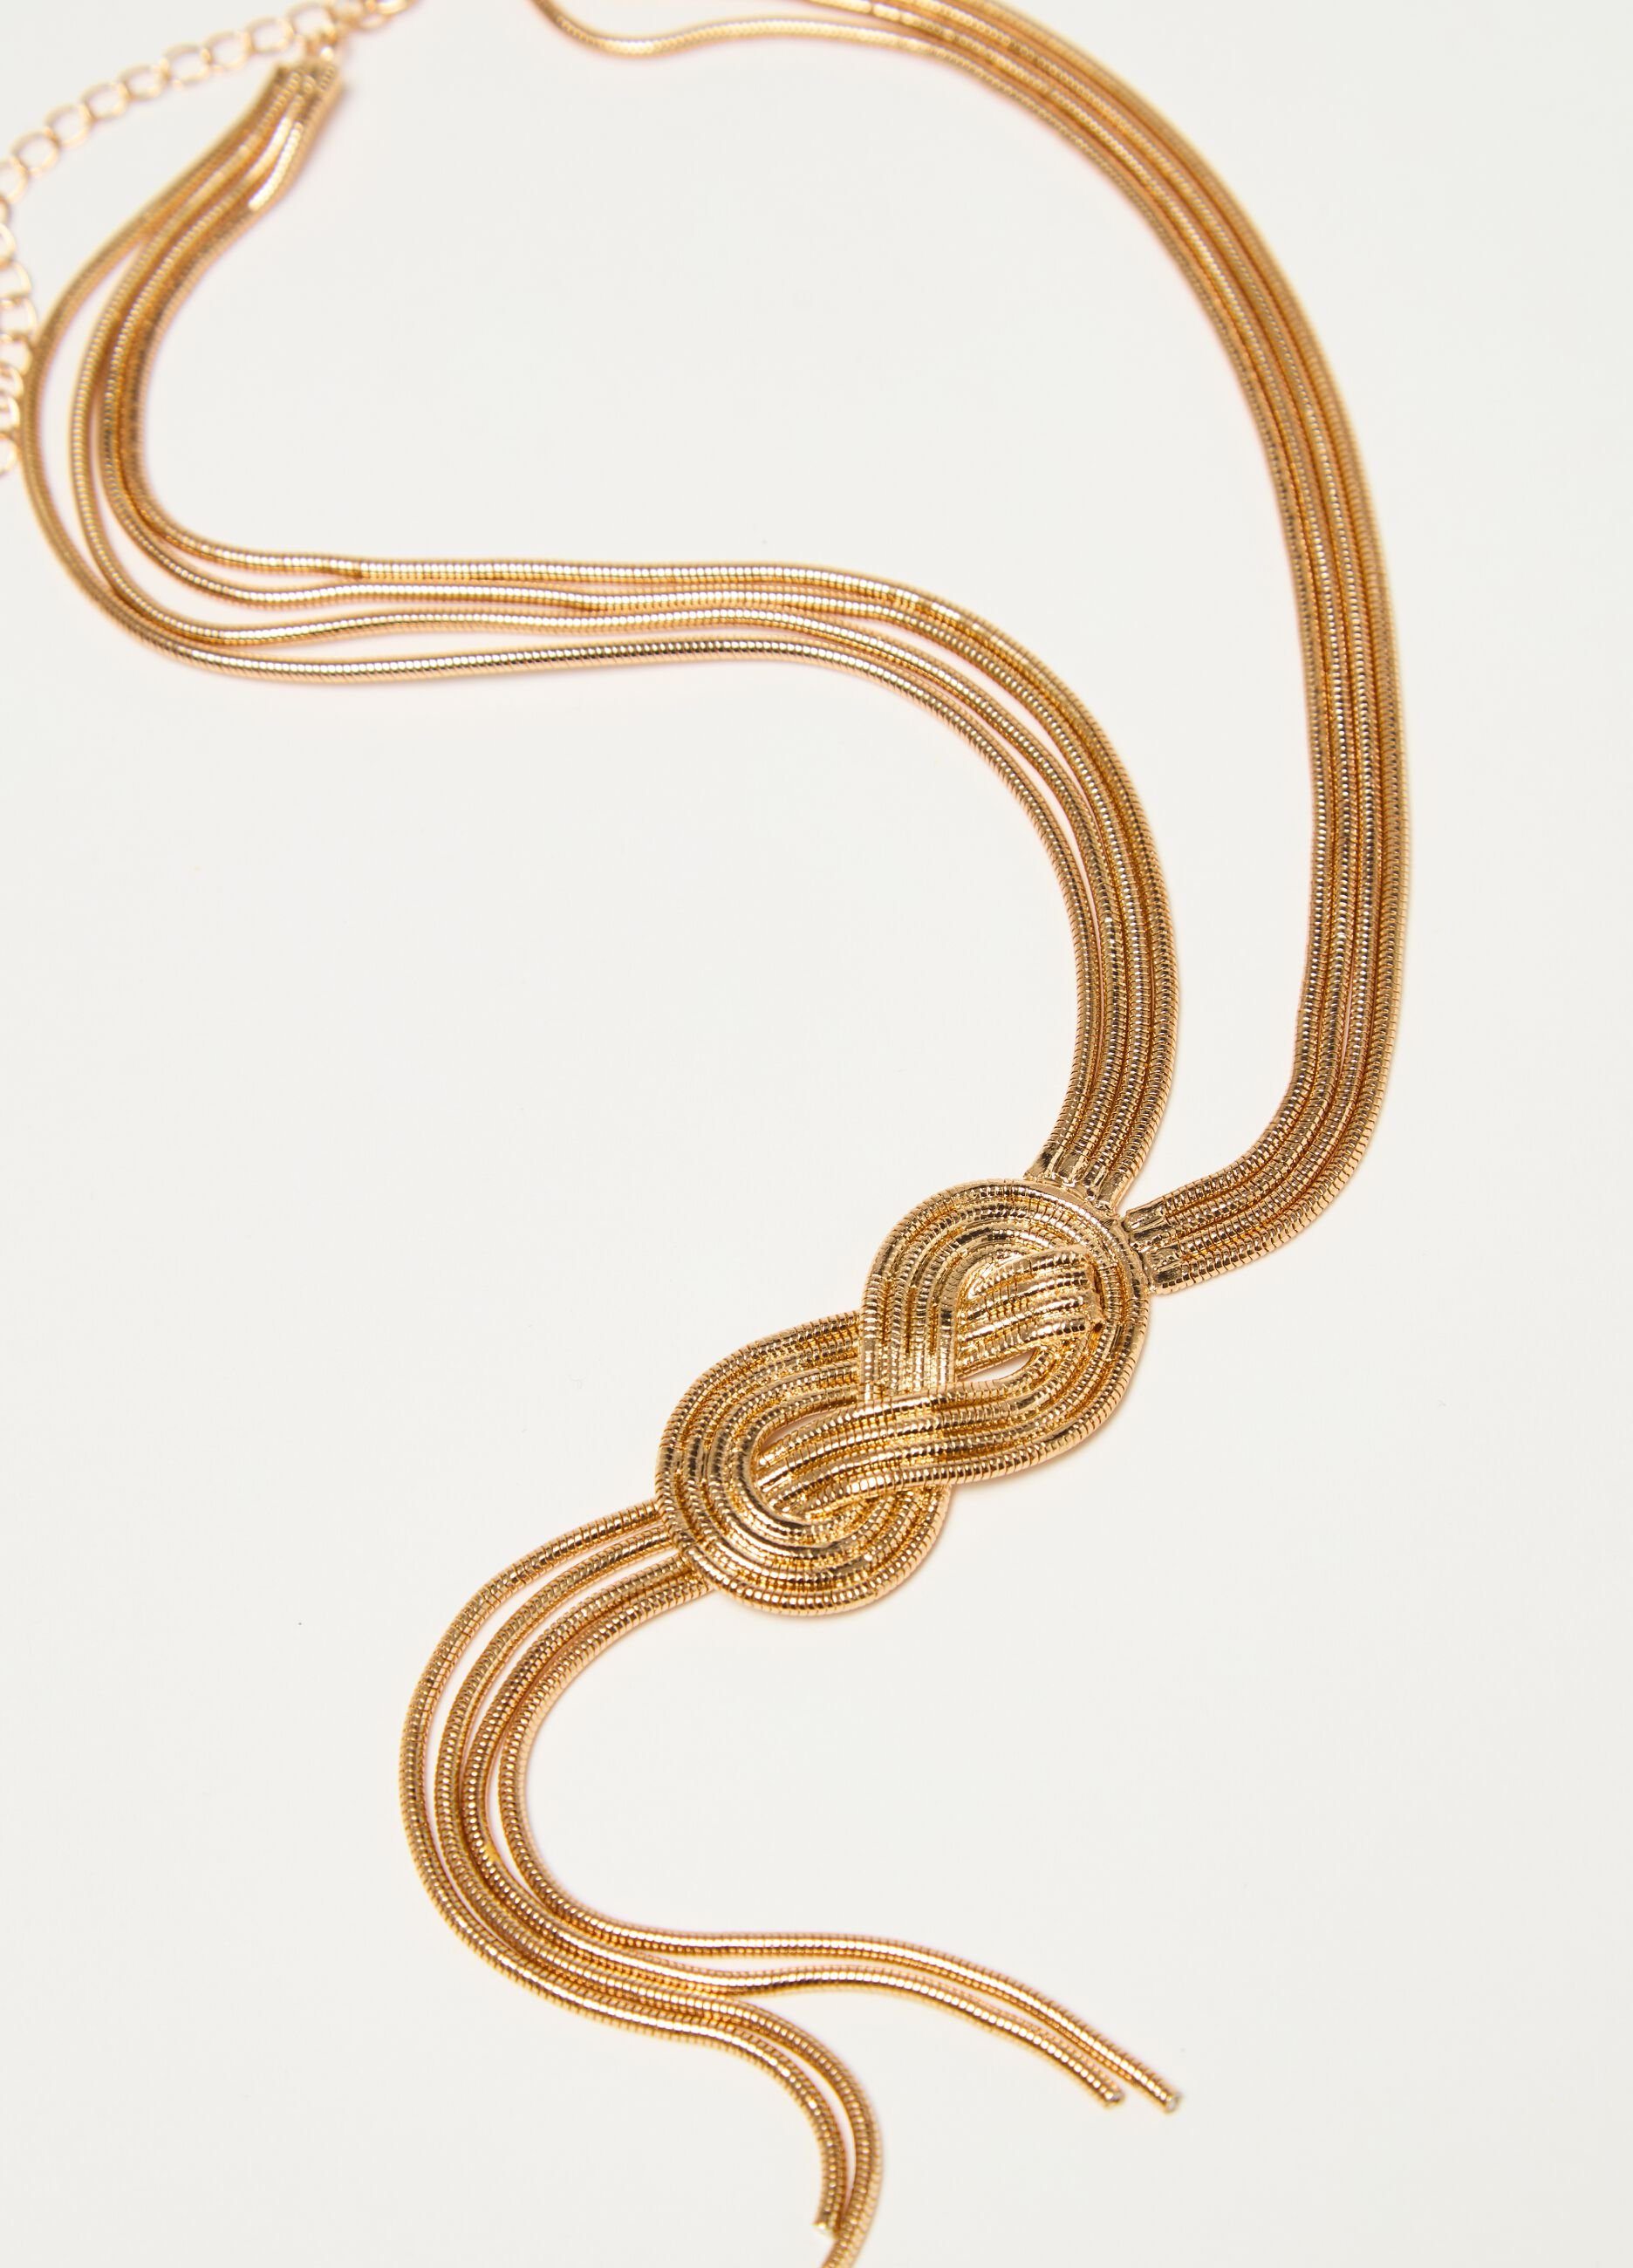 Multi-strand necklace with knot